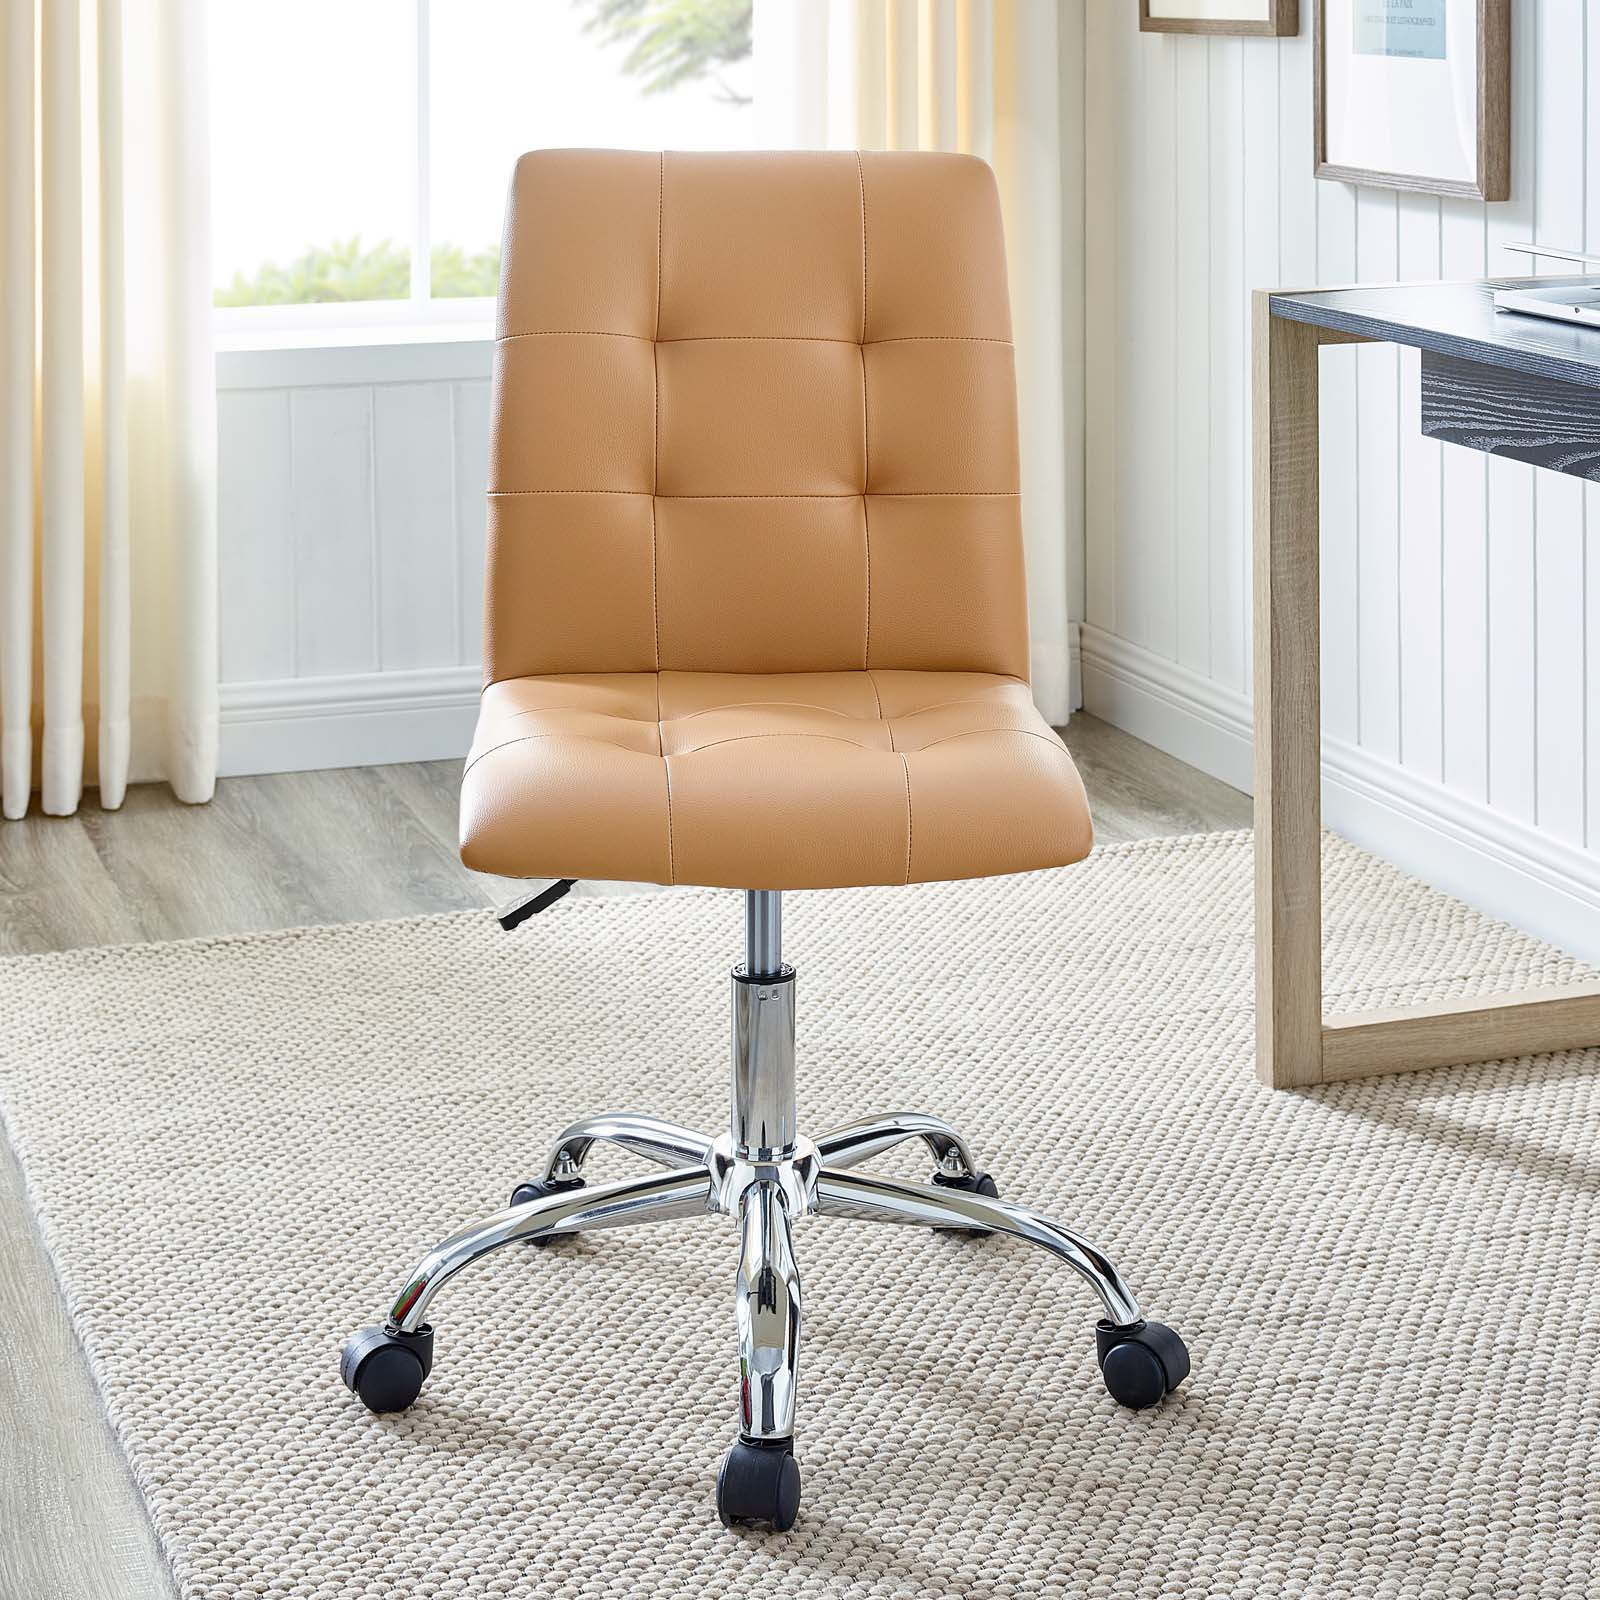 Modway Task Chairs - Prim Armless Mid Back Office Chair Tan